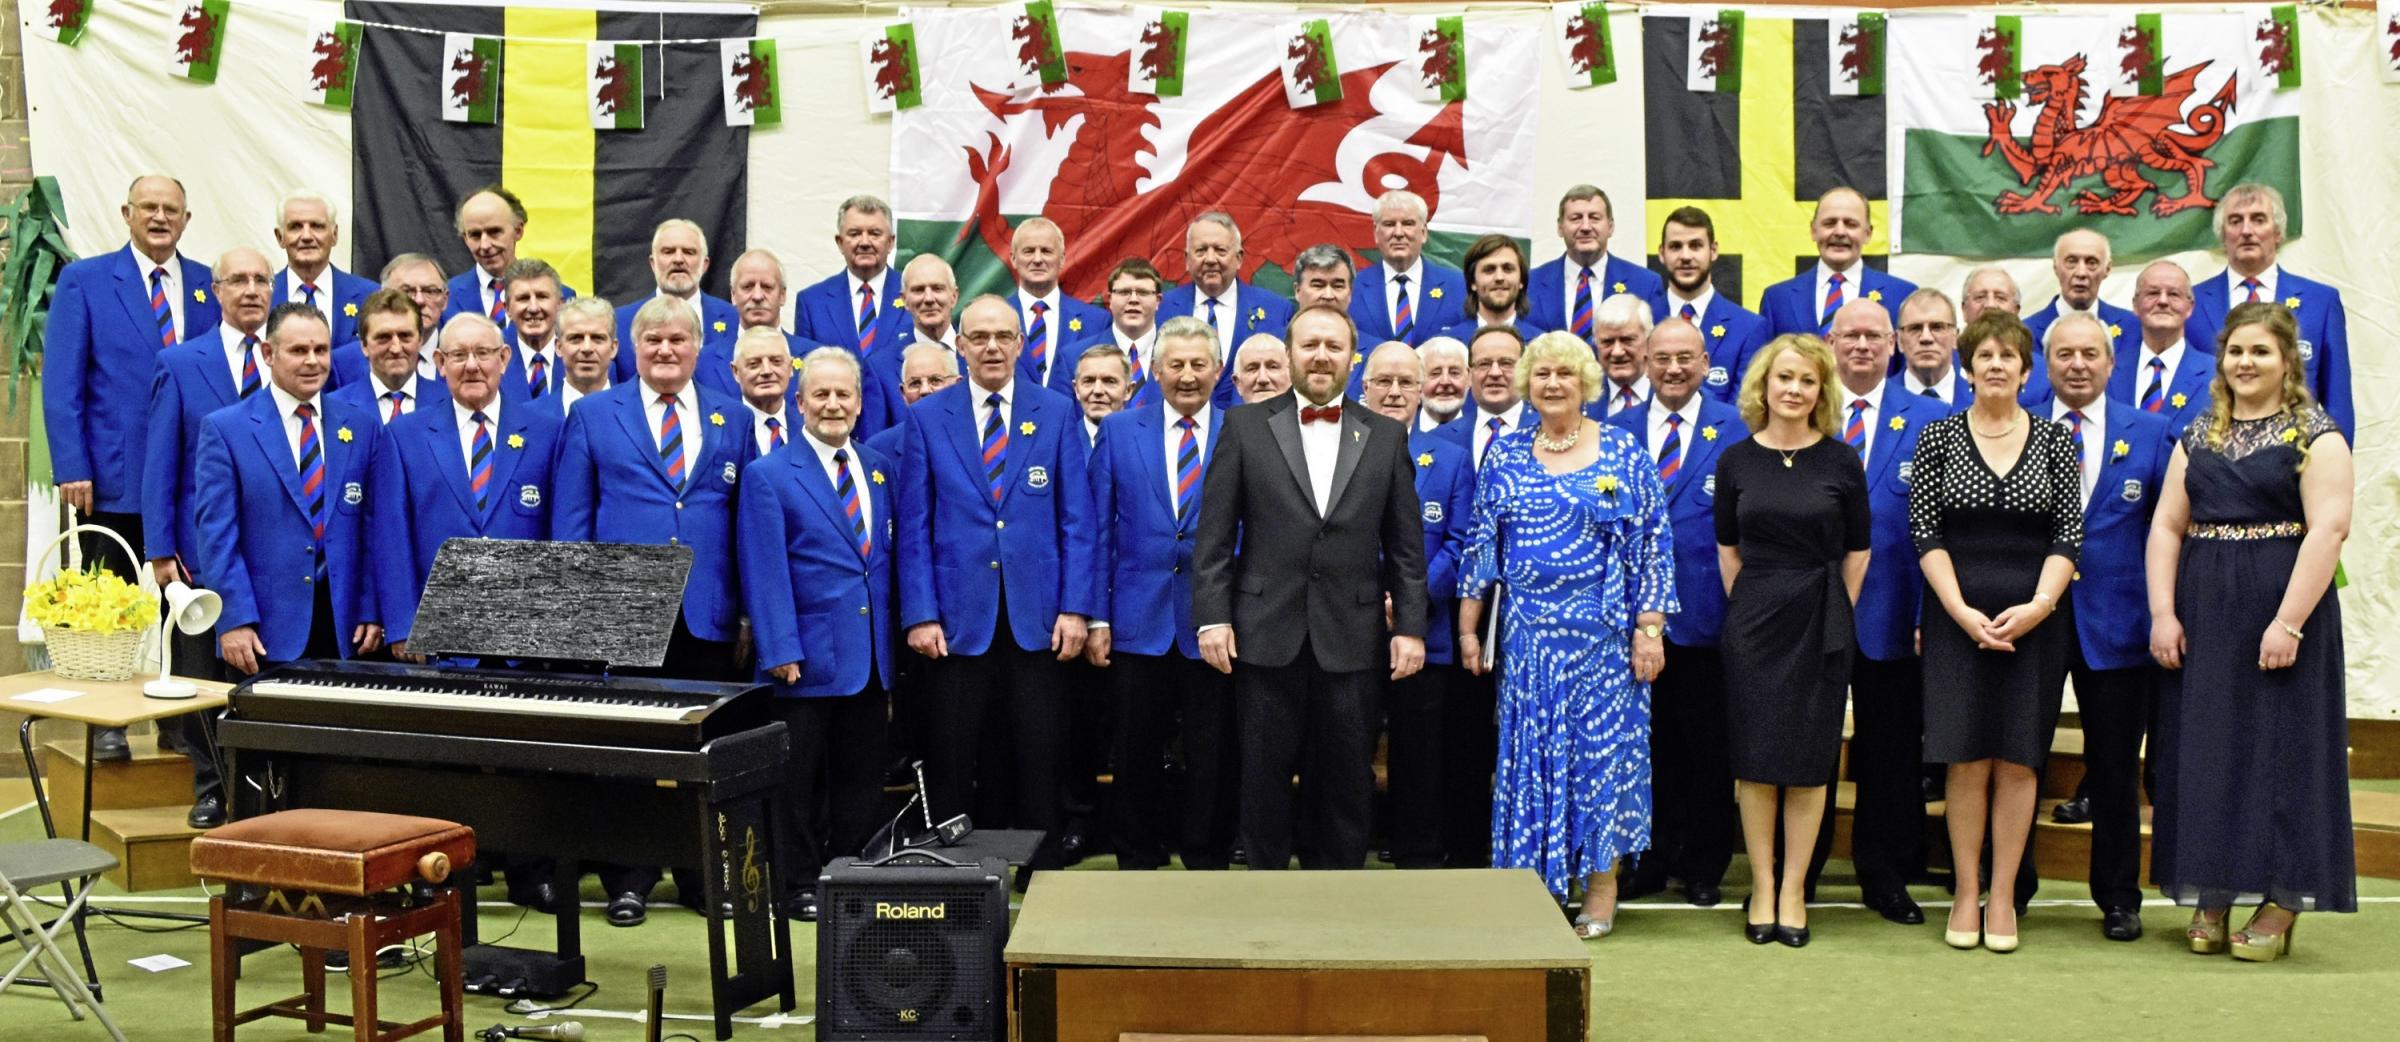 Builth Male Voice Choir at the St Davids Day concert with, front from left, Gwynedd Parry, Luned Jones, Meinir Jones Parry, Ann Bufton and Morgan-Ellen Field in 2017.